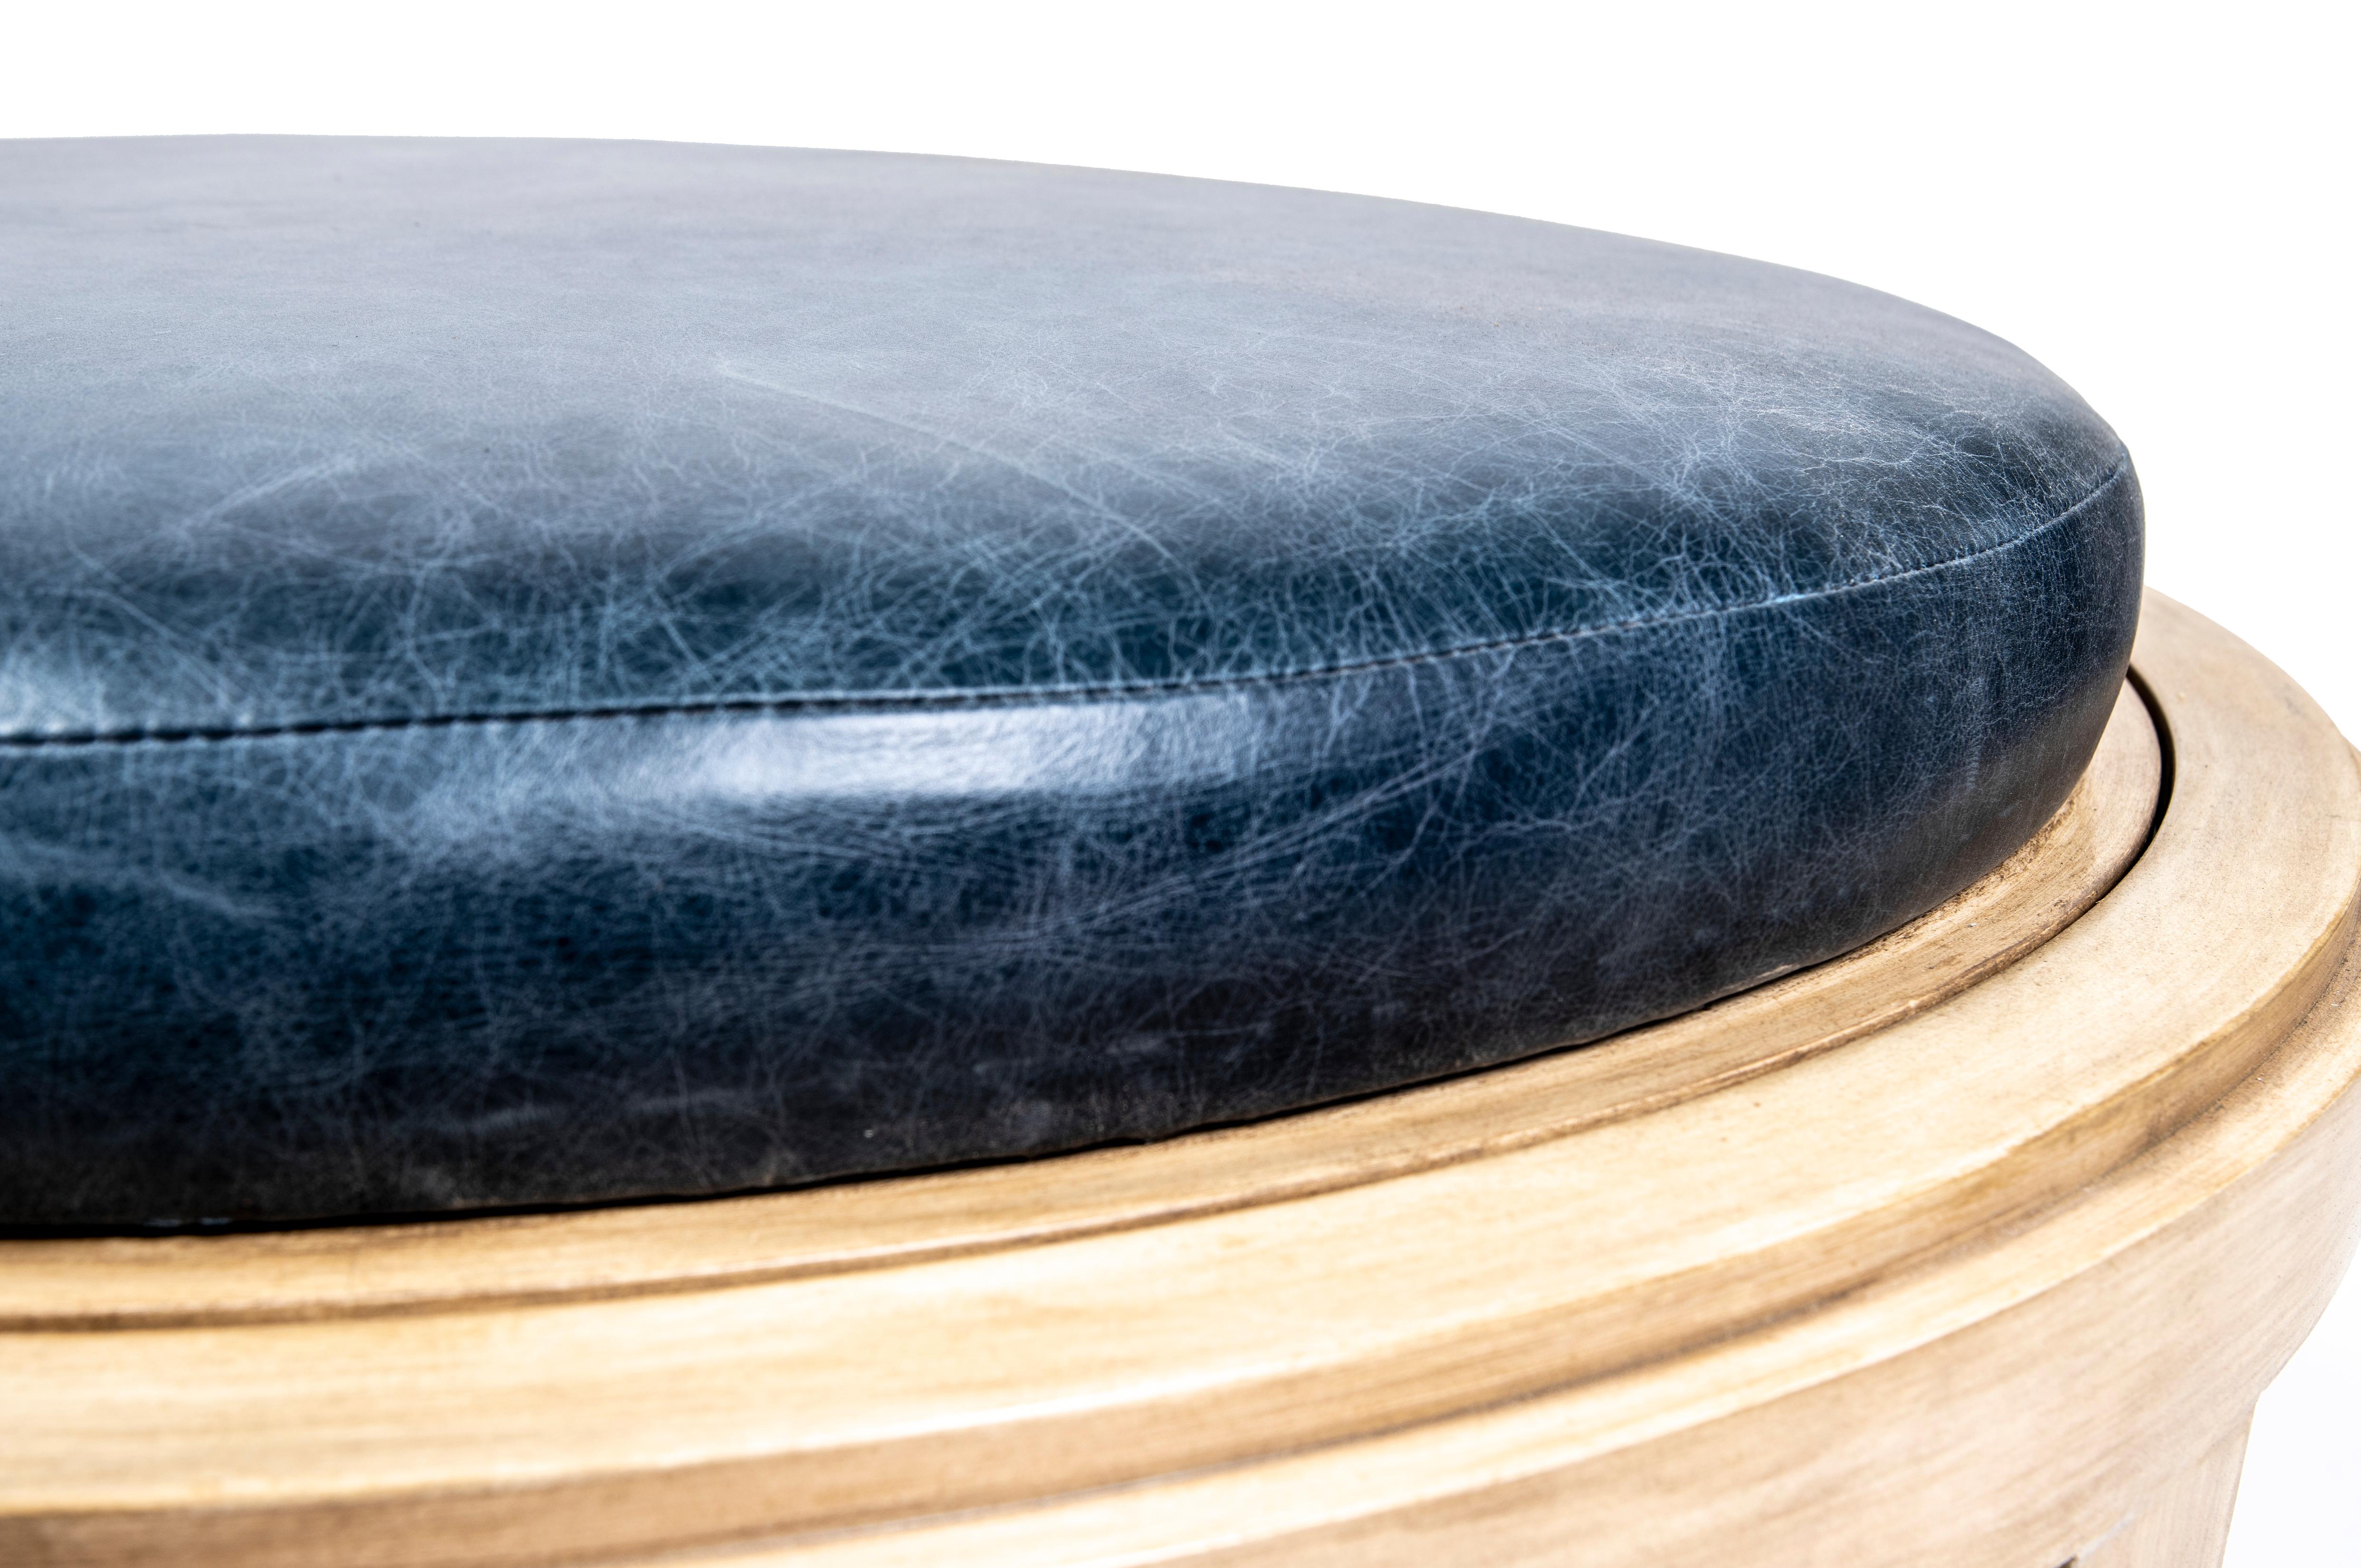 The Lindsay Ottoman is part of the Sea to Sierra Collection that offers personal customization of design elements that pay tribute to Northern California's coastal landscape. Originating from Ashley’s dreamlike vision of the beach, selections of